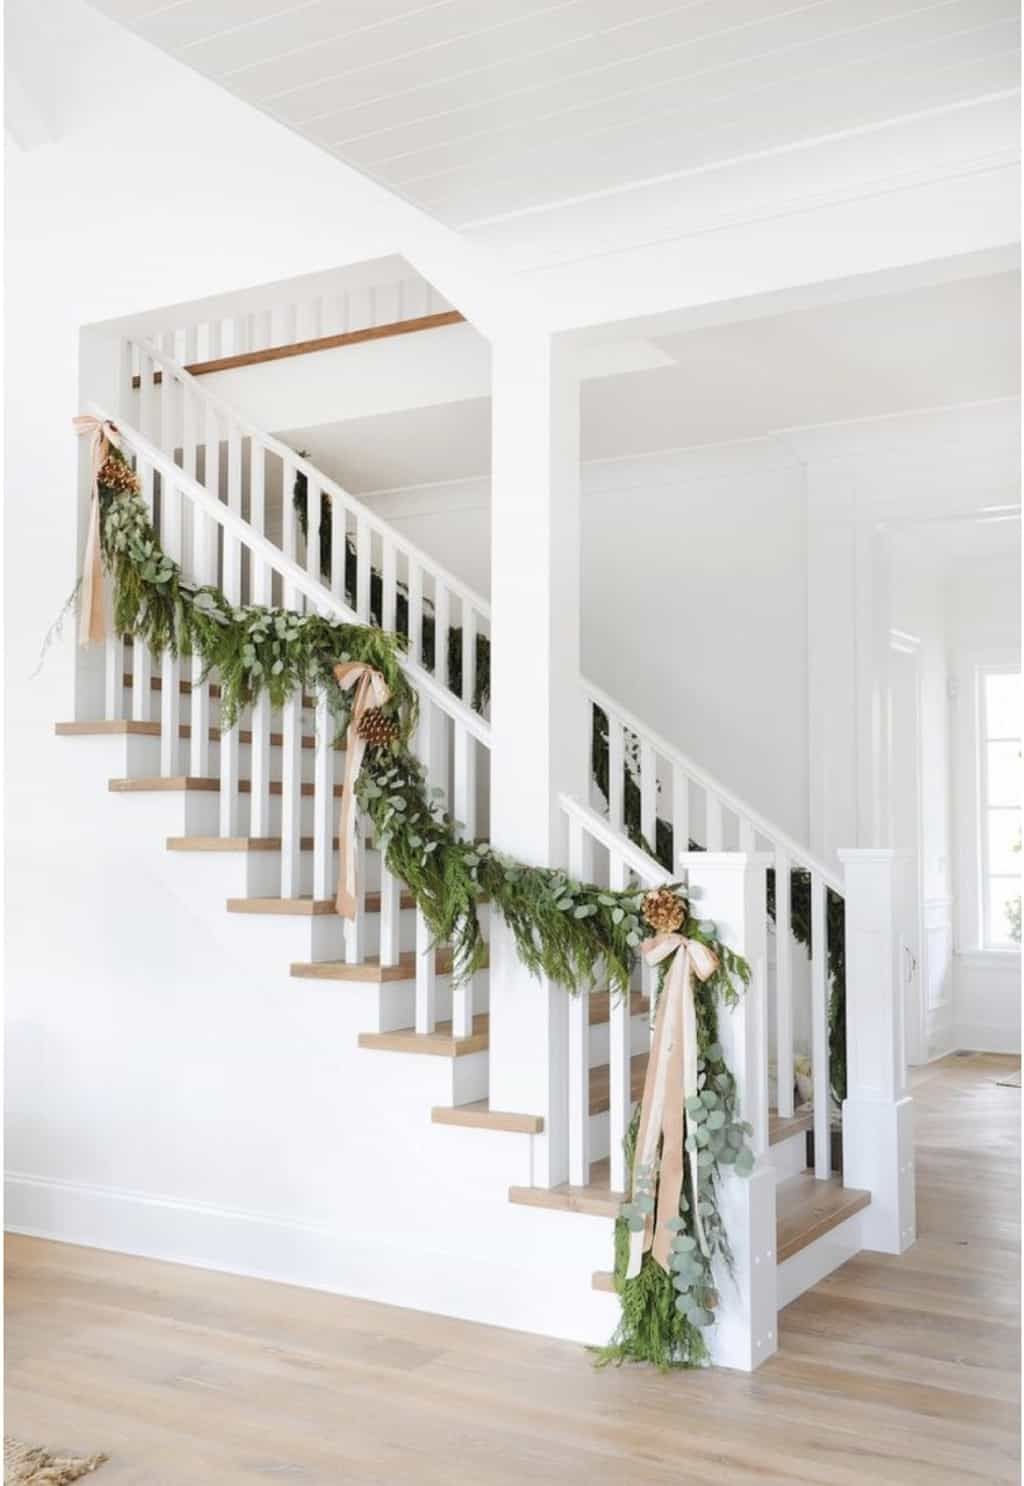 Christmas Decor We Are Drooling Over in 2020 - Christmas Decor We Are Drooling Over in 2020 -   18 christmas decorations living room farmhouse ideas